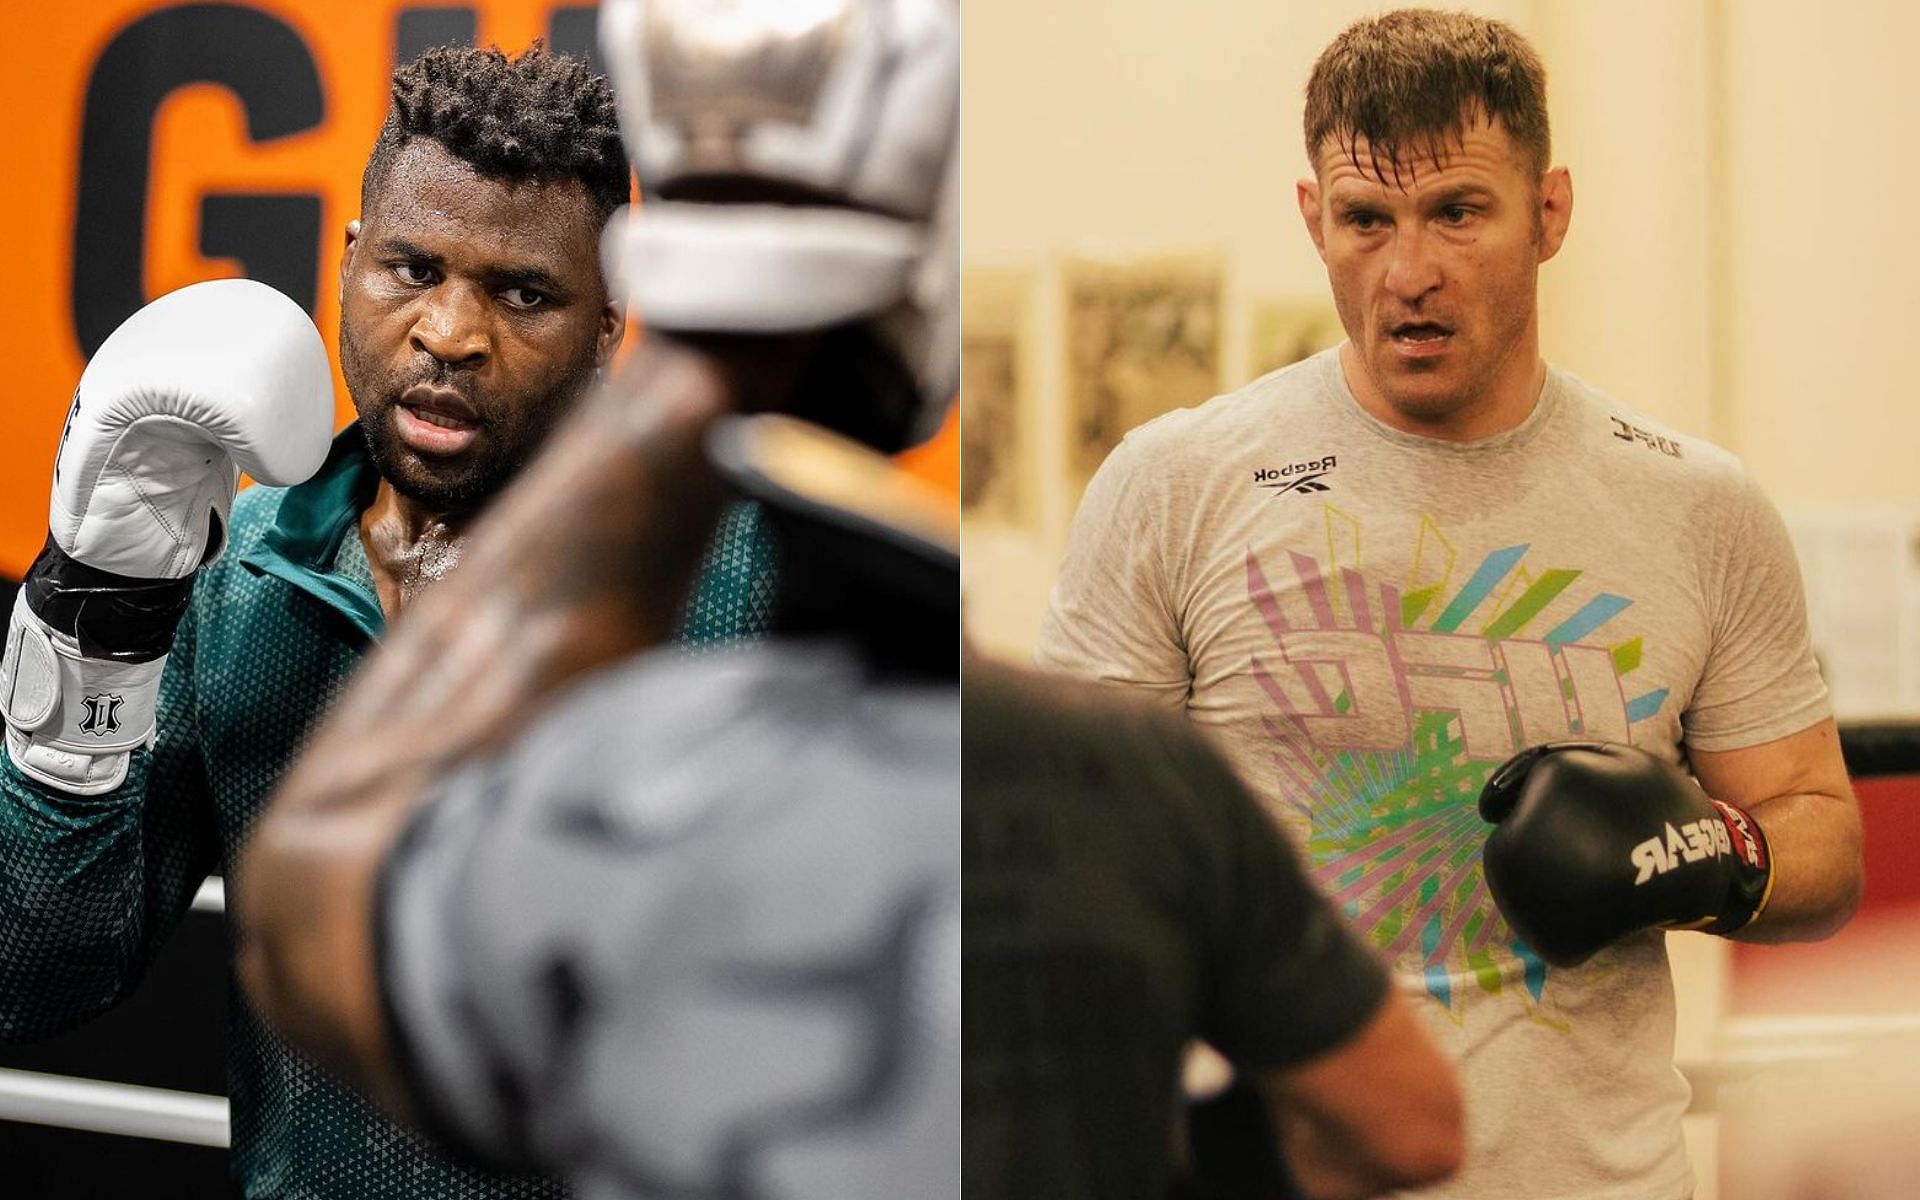 Francis Ngannou (left) and Stipe Miocic (right) [Image credits: @francisngannou and @stipemiocic on Instagram]